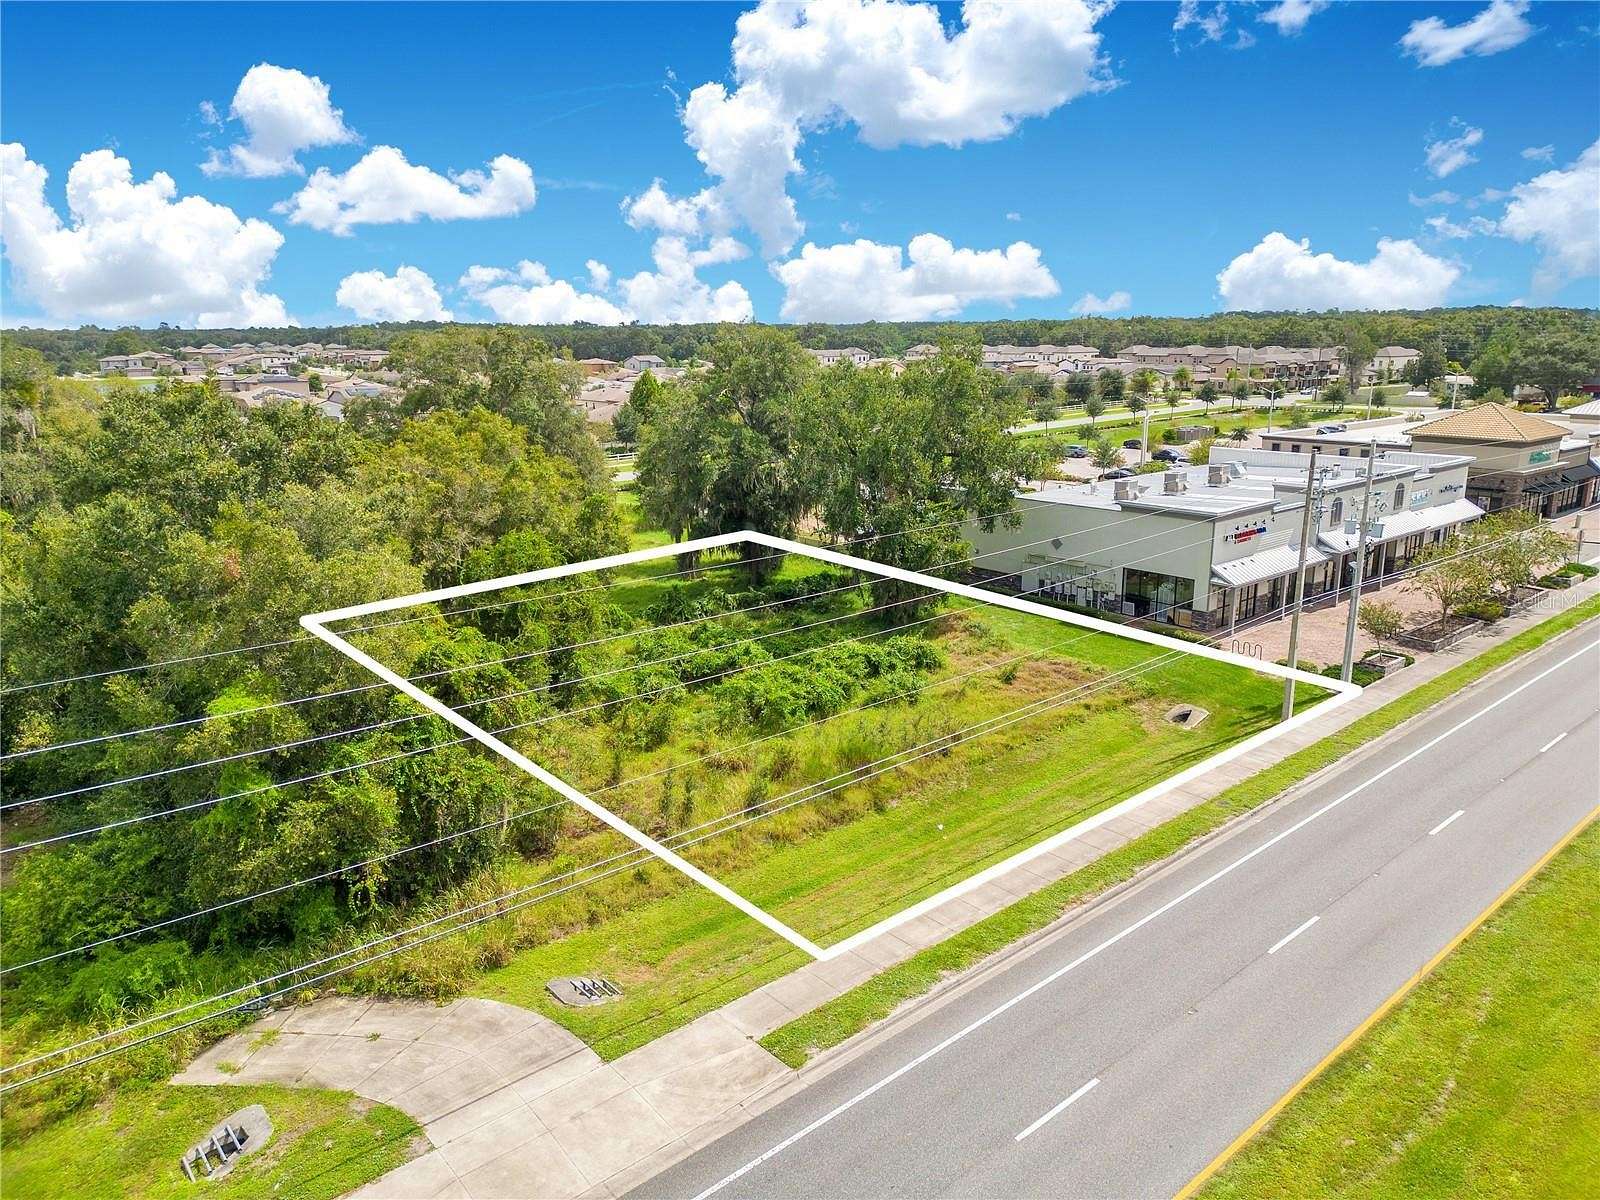 0.21 Acres of Mixed-Use Land for Sale in St. Cloud, Florida